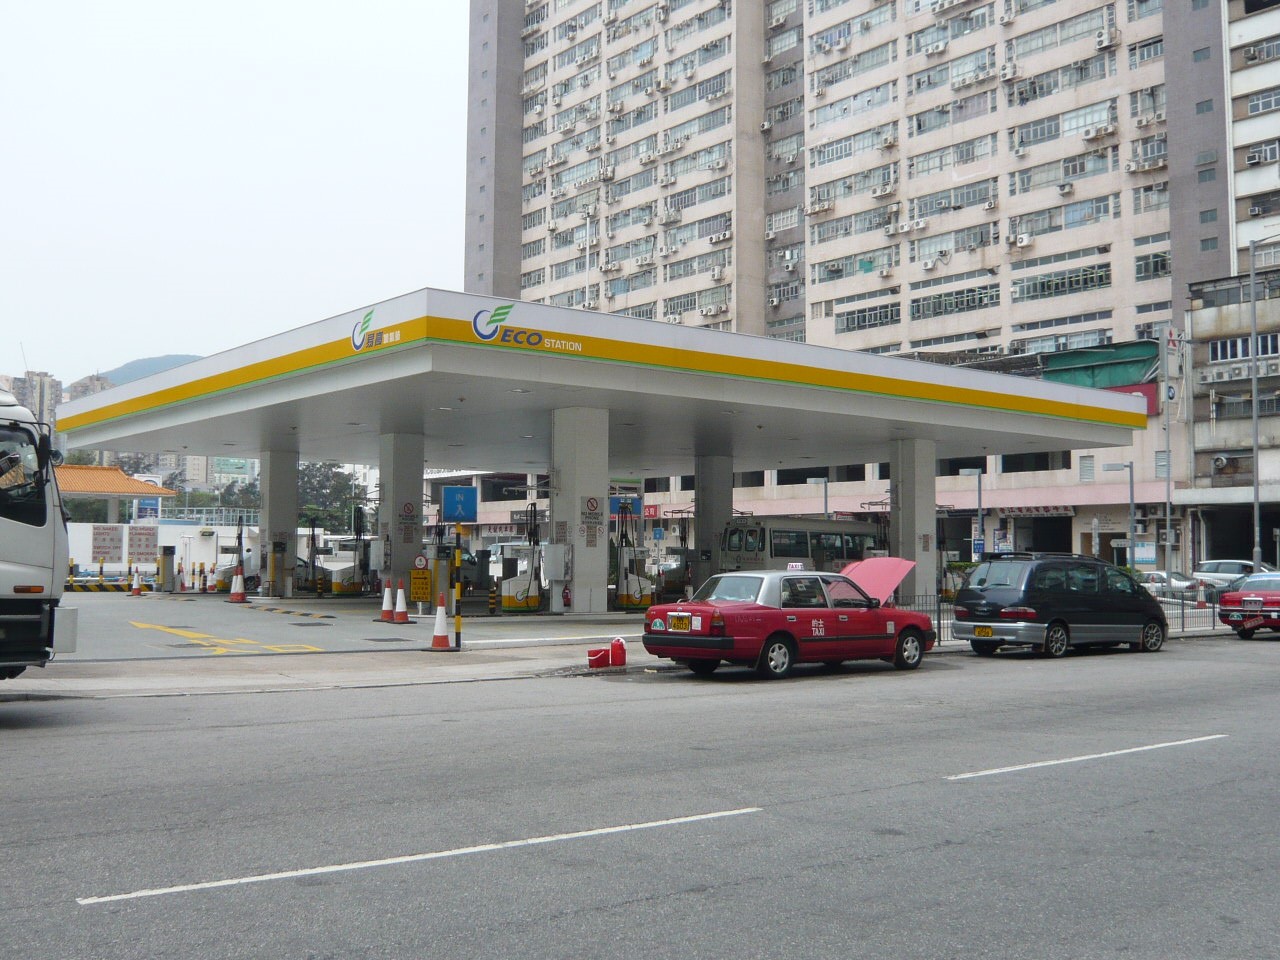 Temporarily suspension of refueling service at Chai Wan dedicated LPG filling station